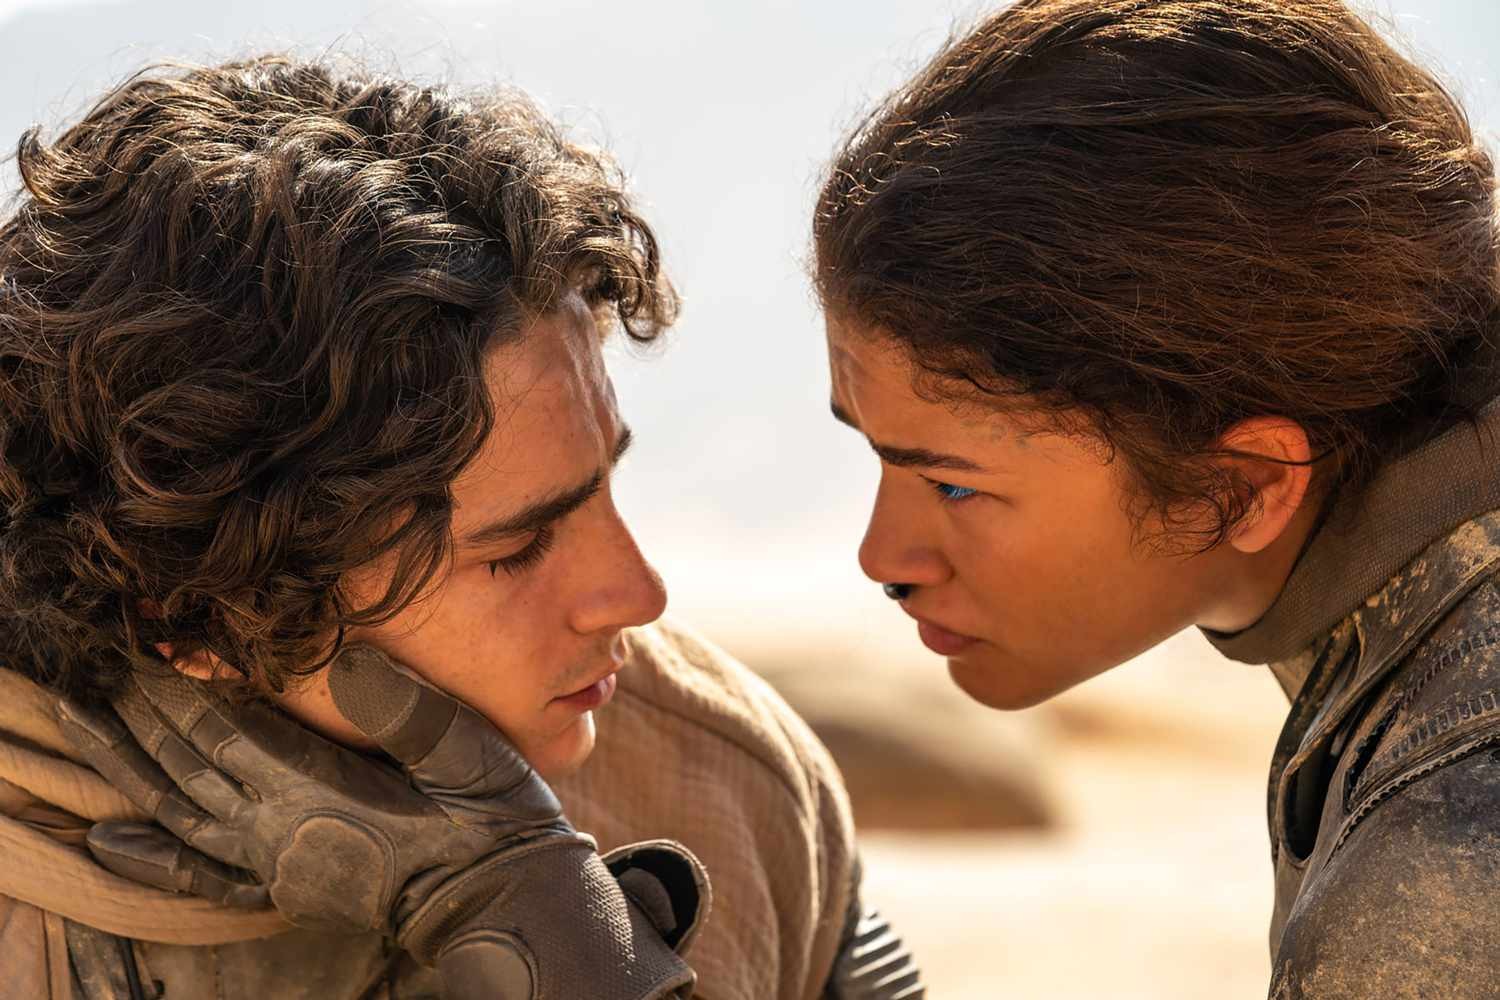 Dune: Part 2 jas received rave reviews from both critics and audiences